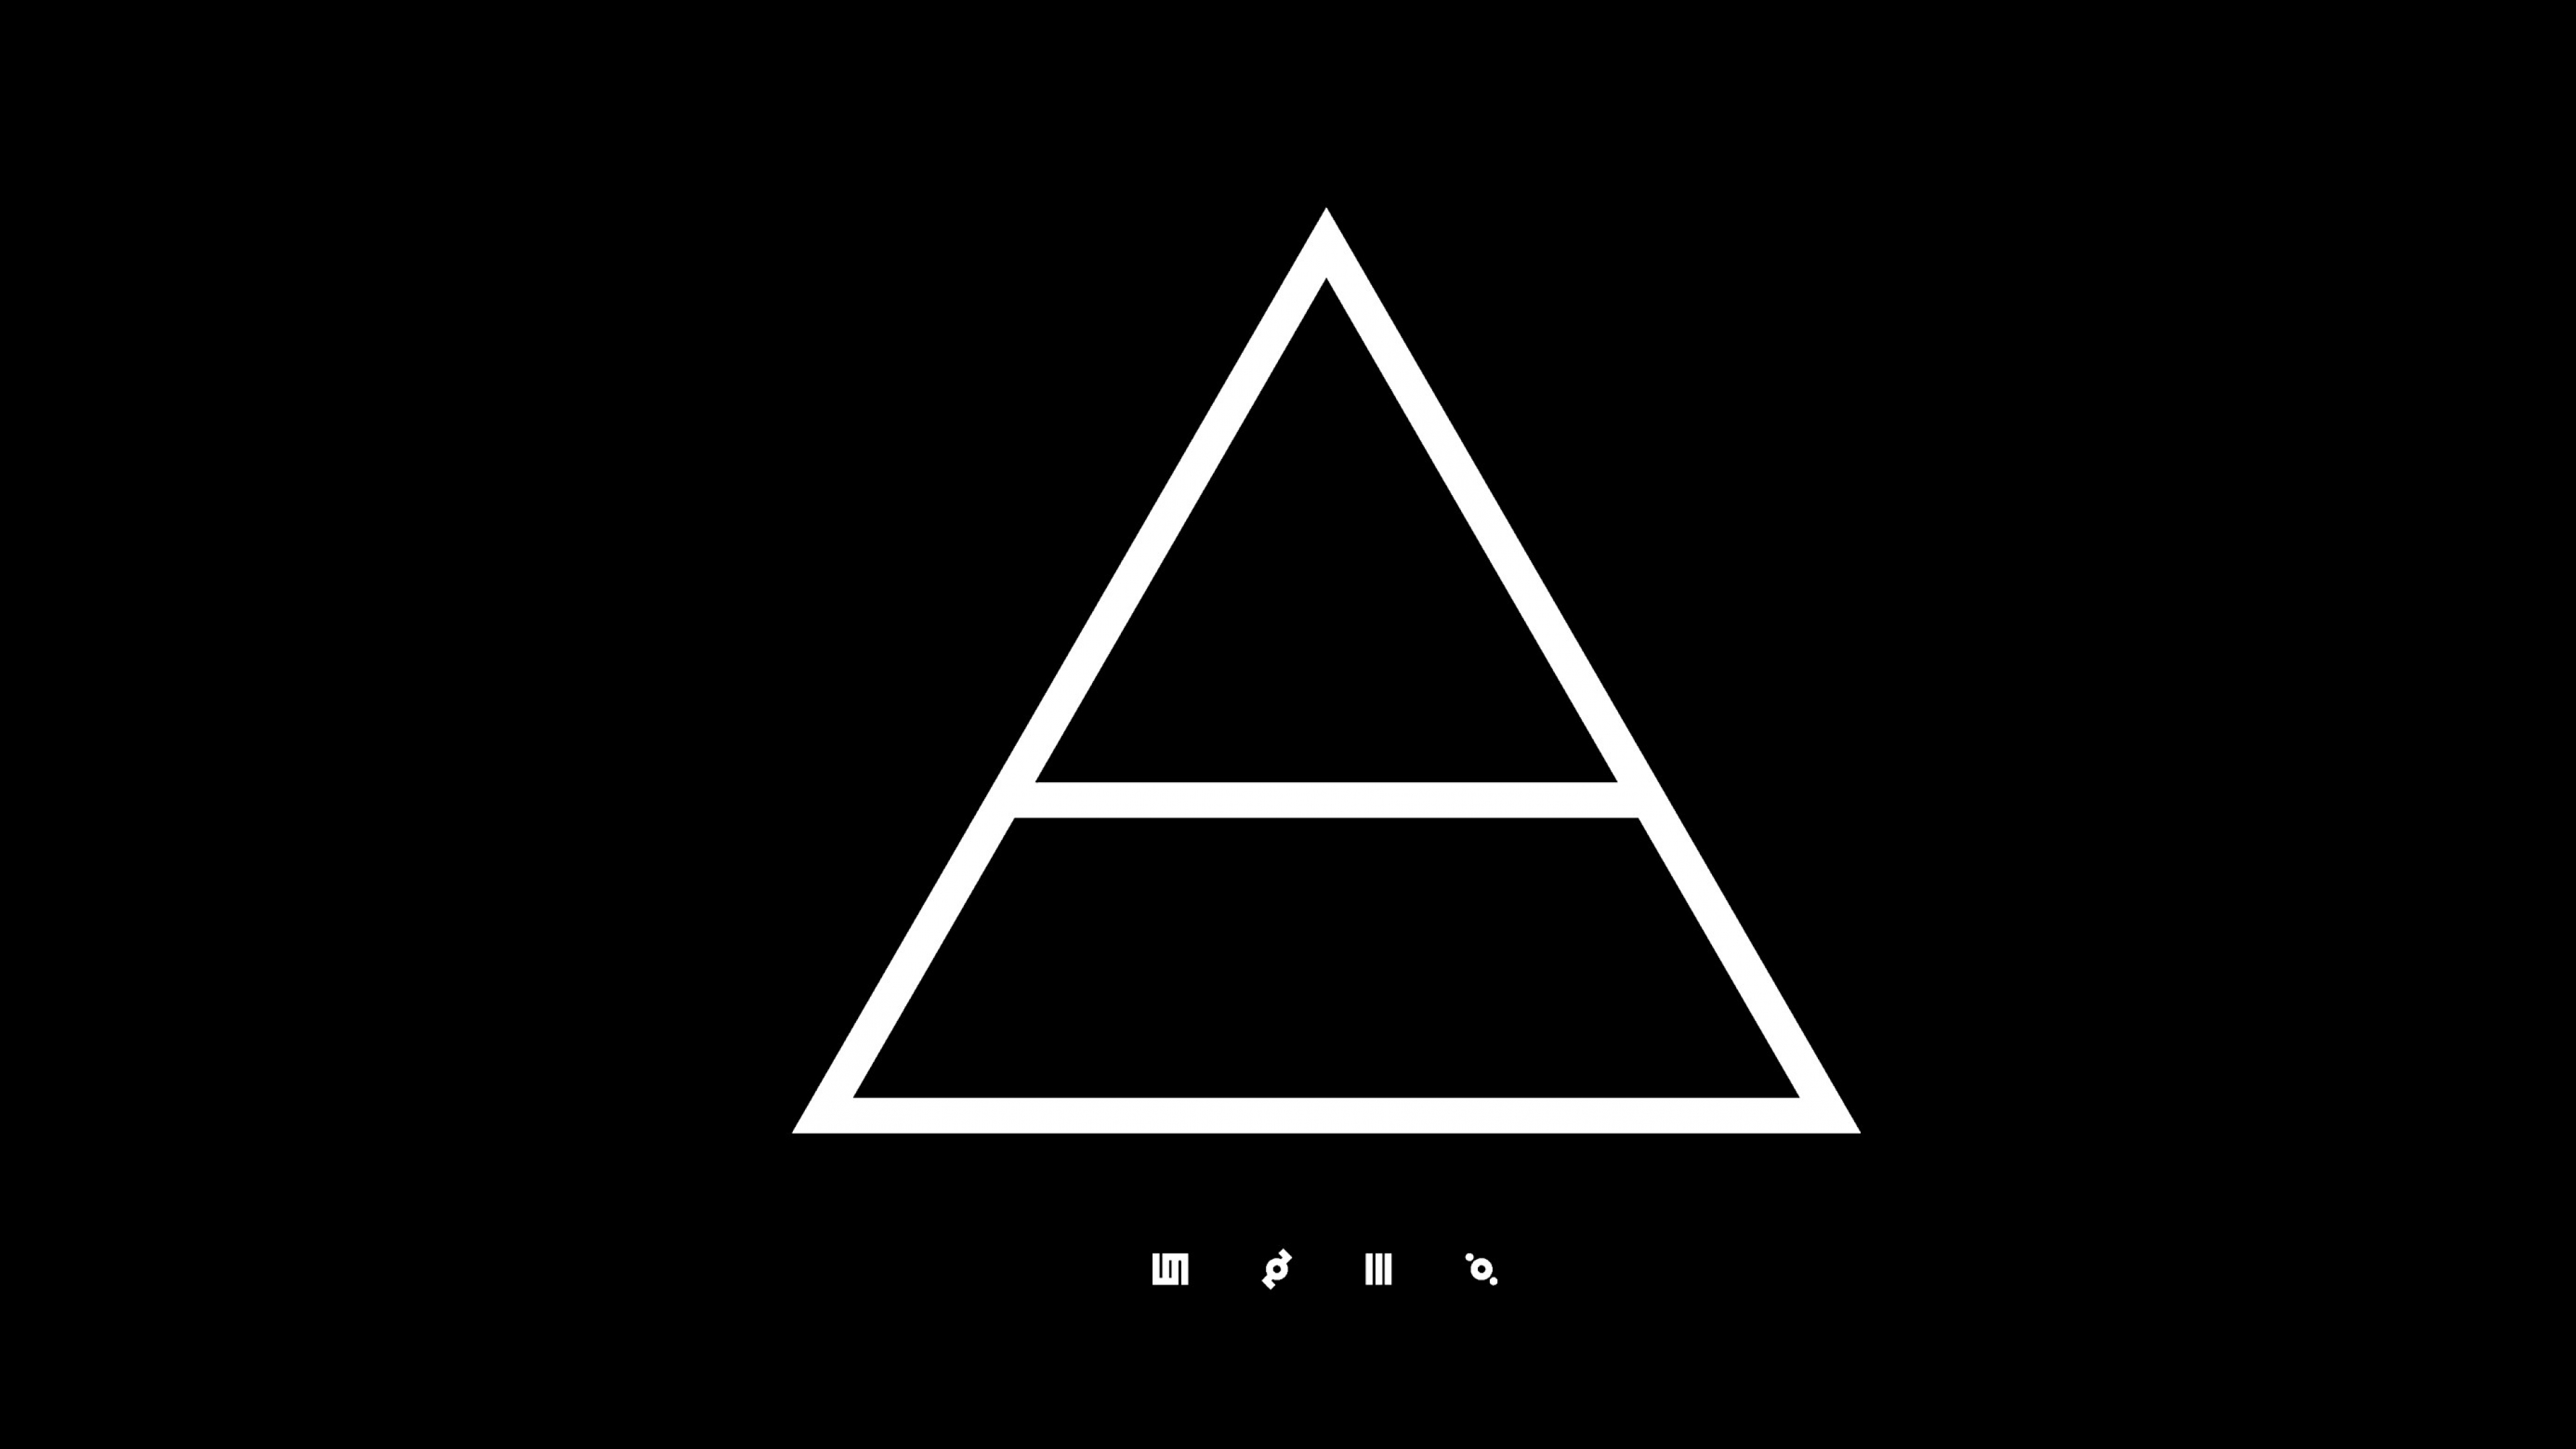 thirty seconds to mars, music, american, rock band